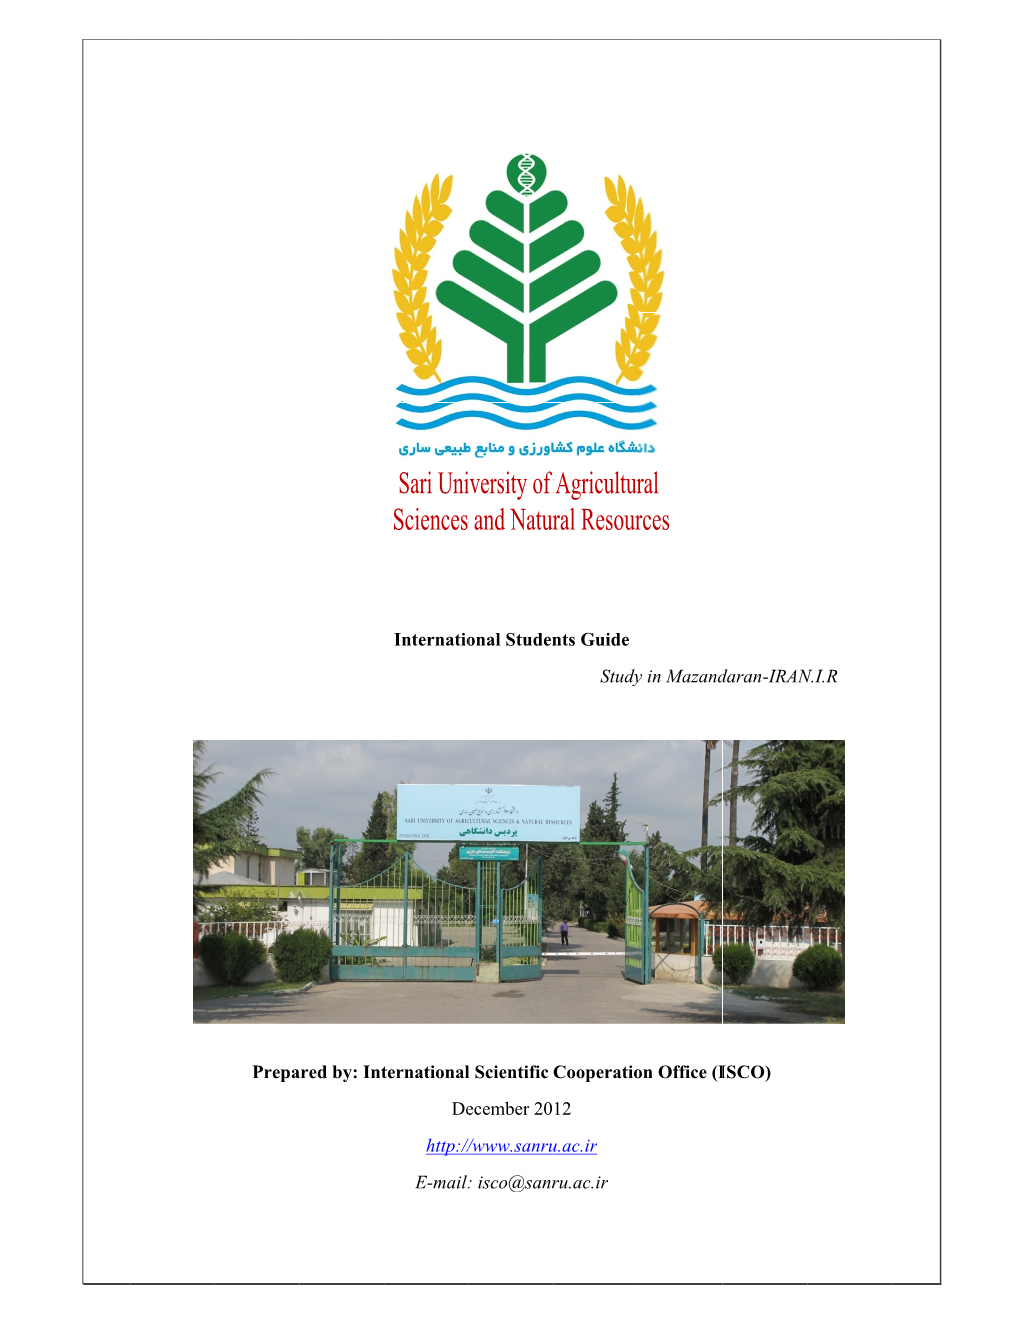 Sari University of Agricultural Sciences and Natural Resources